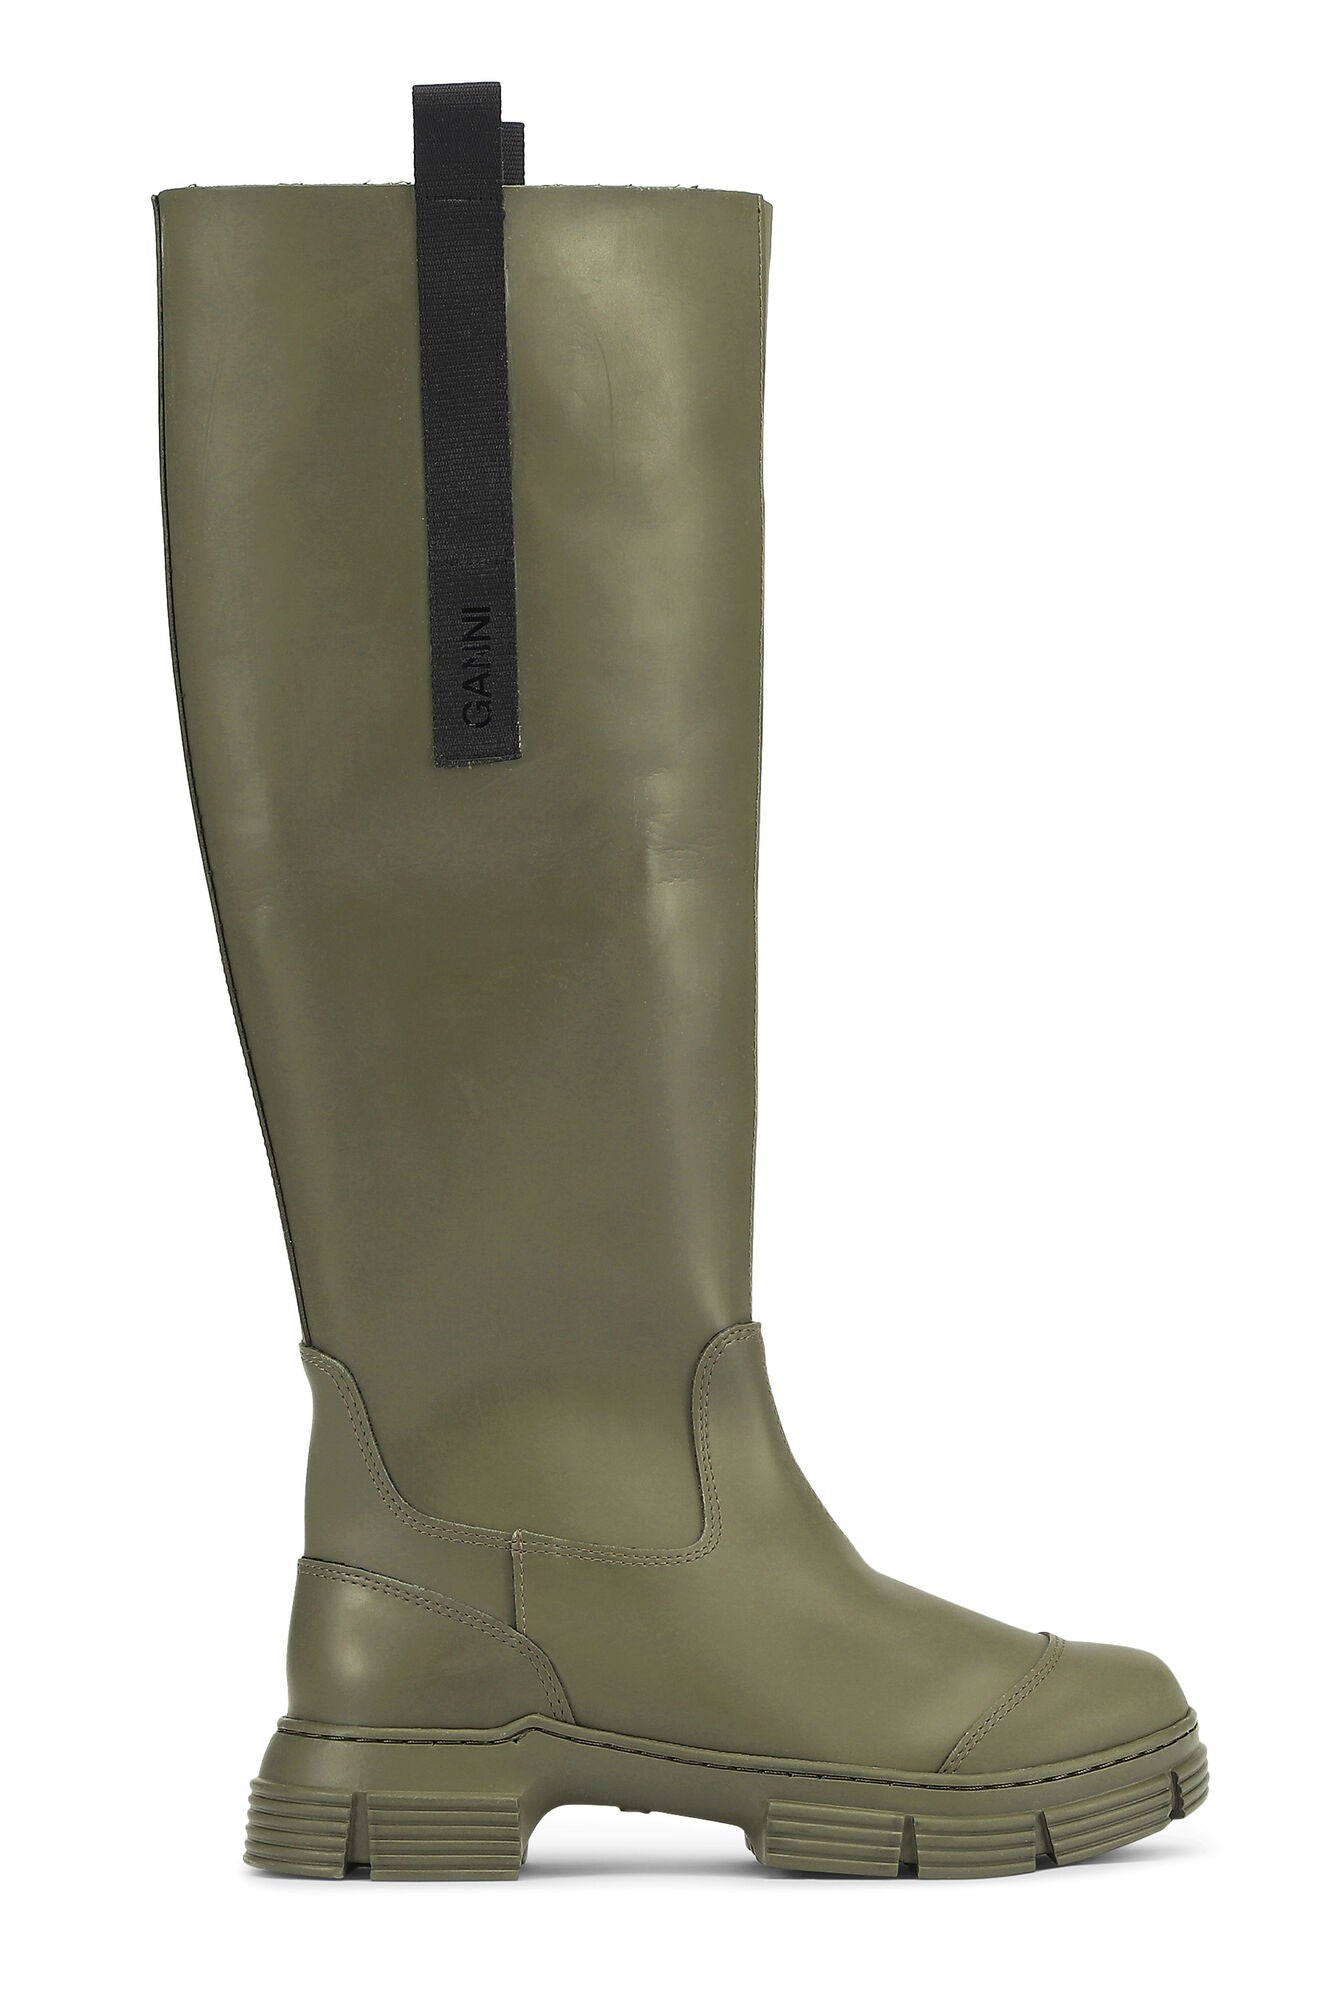 Recycled Rubber Country Boot - Ganni - Danali - S1913-861-37